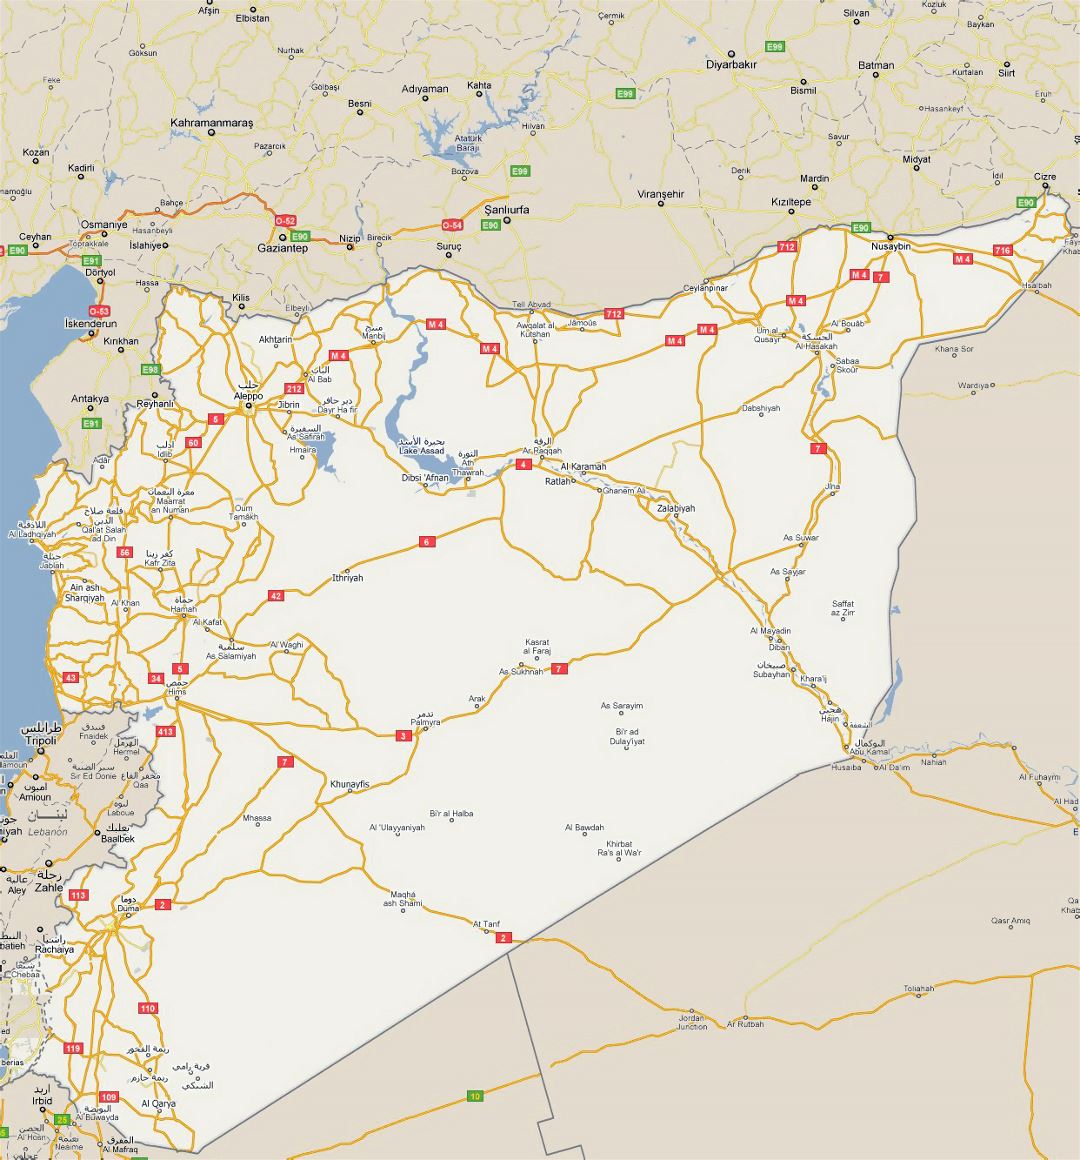 Detailed road map of Syria with all cities